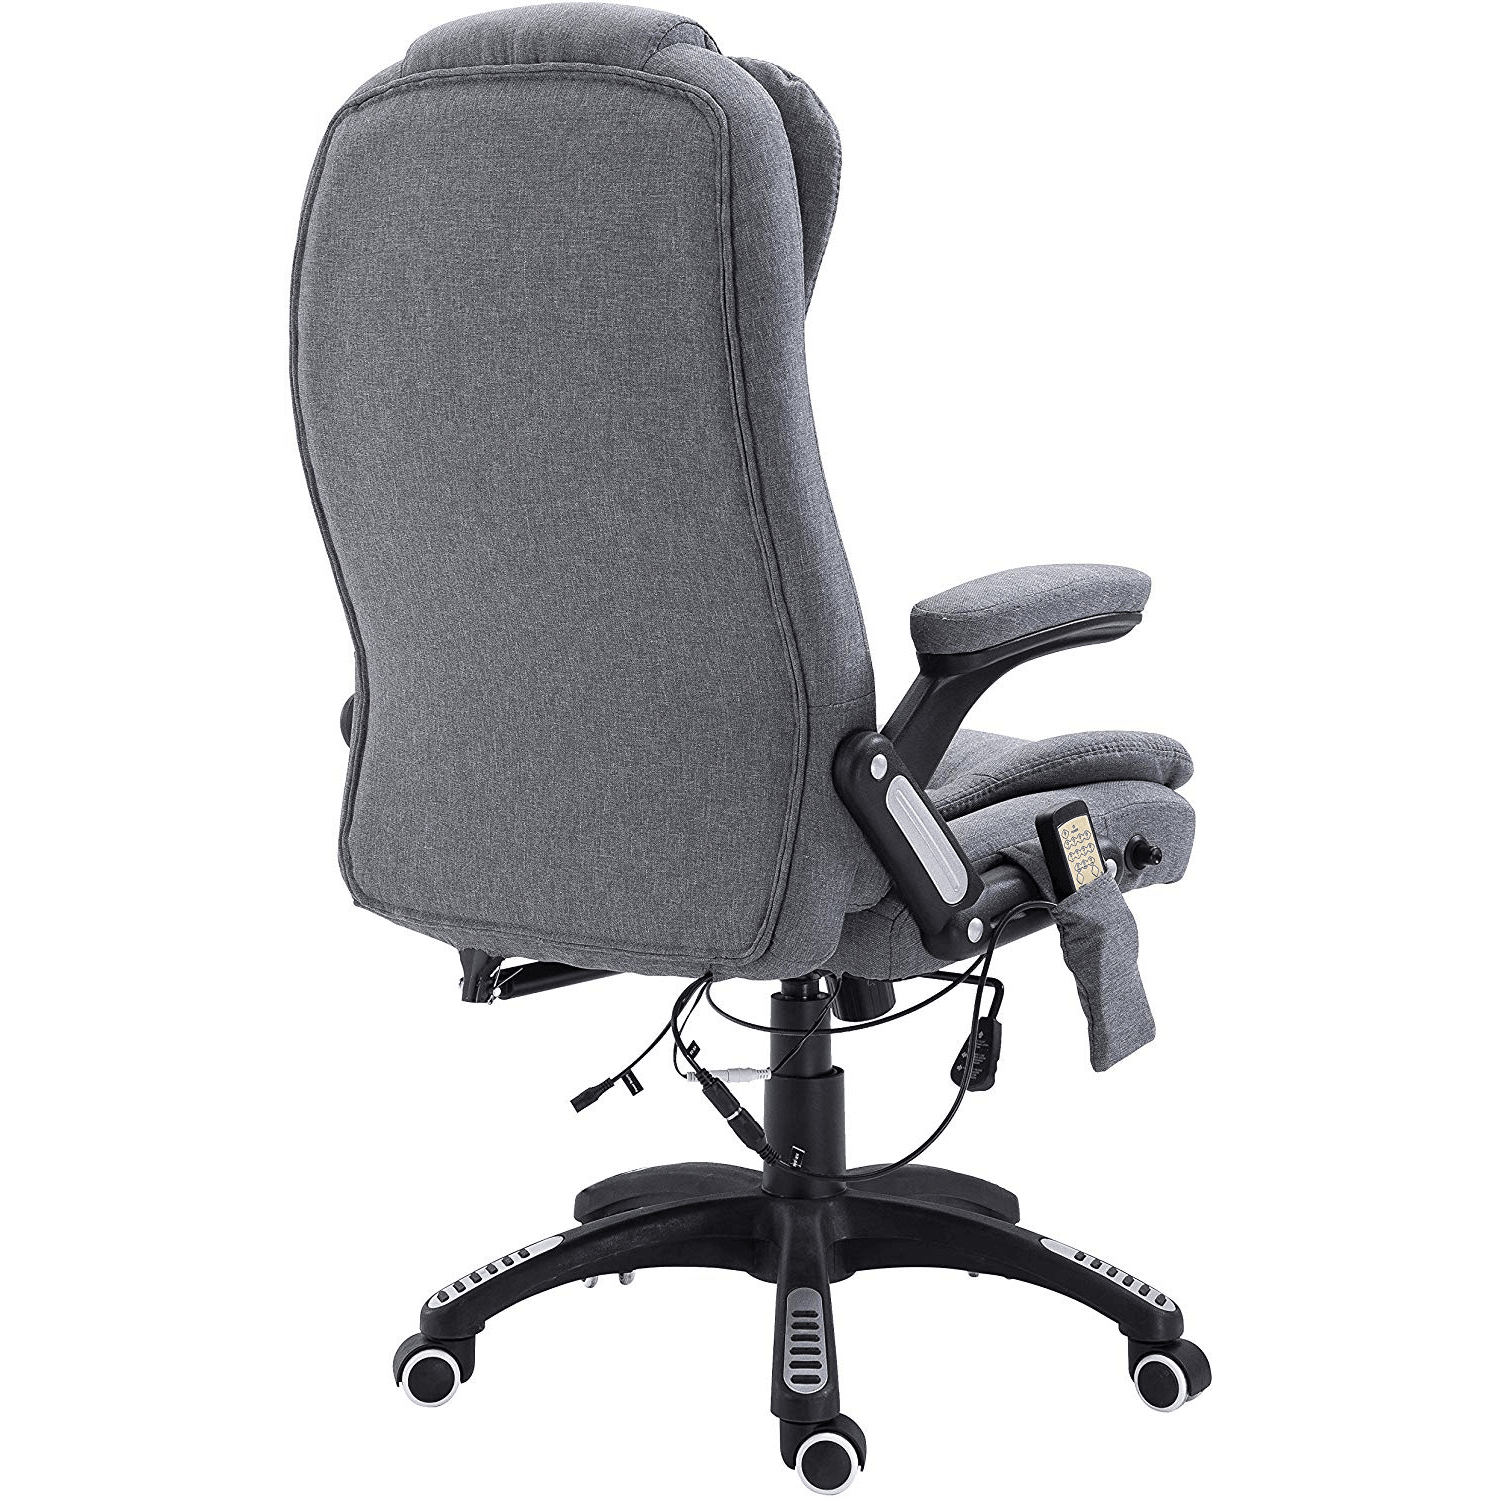 Executive Recline Padded Swivel Office Chair with Vibrating Massage Function, MM17 Grey Fabric